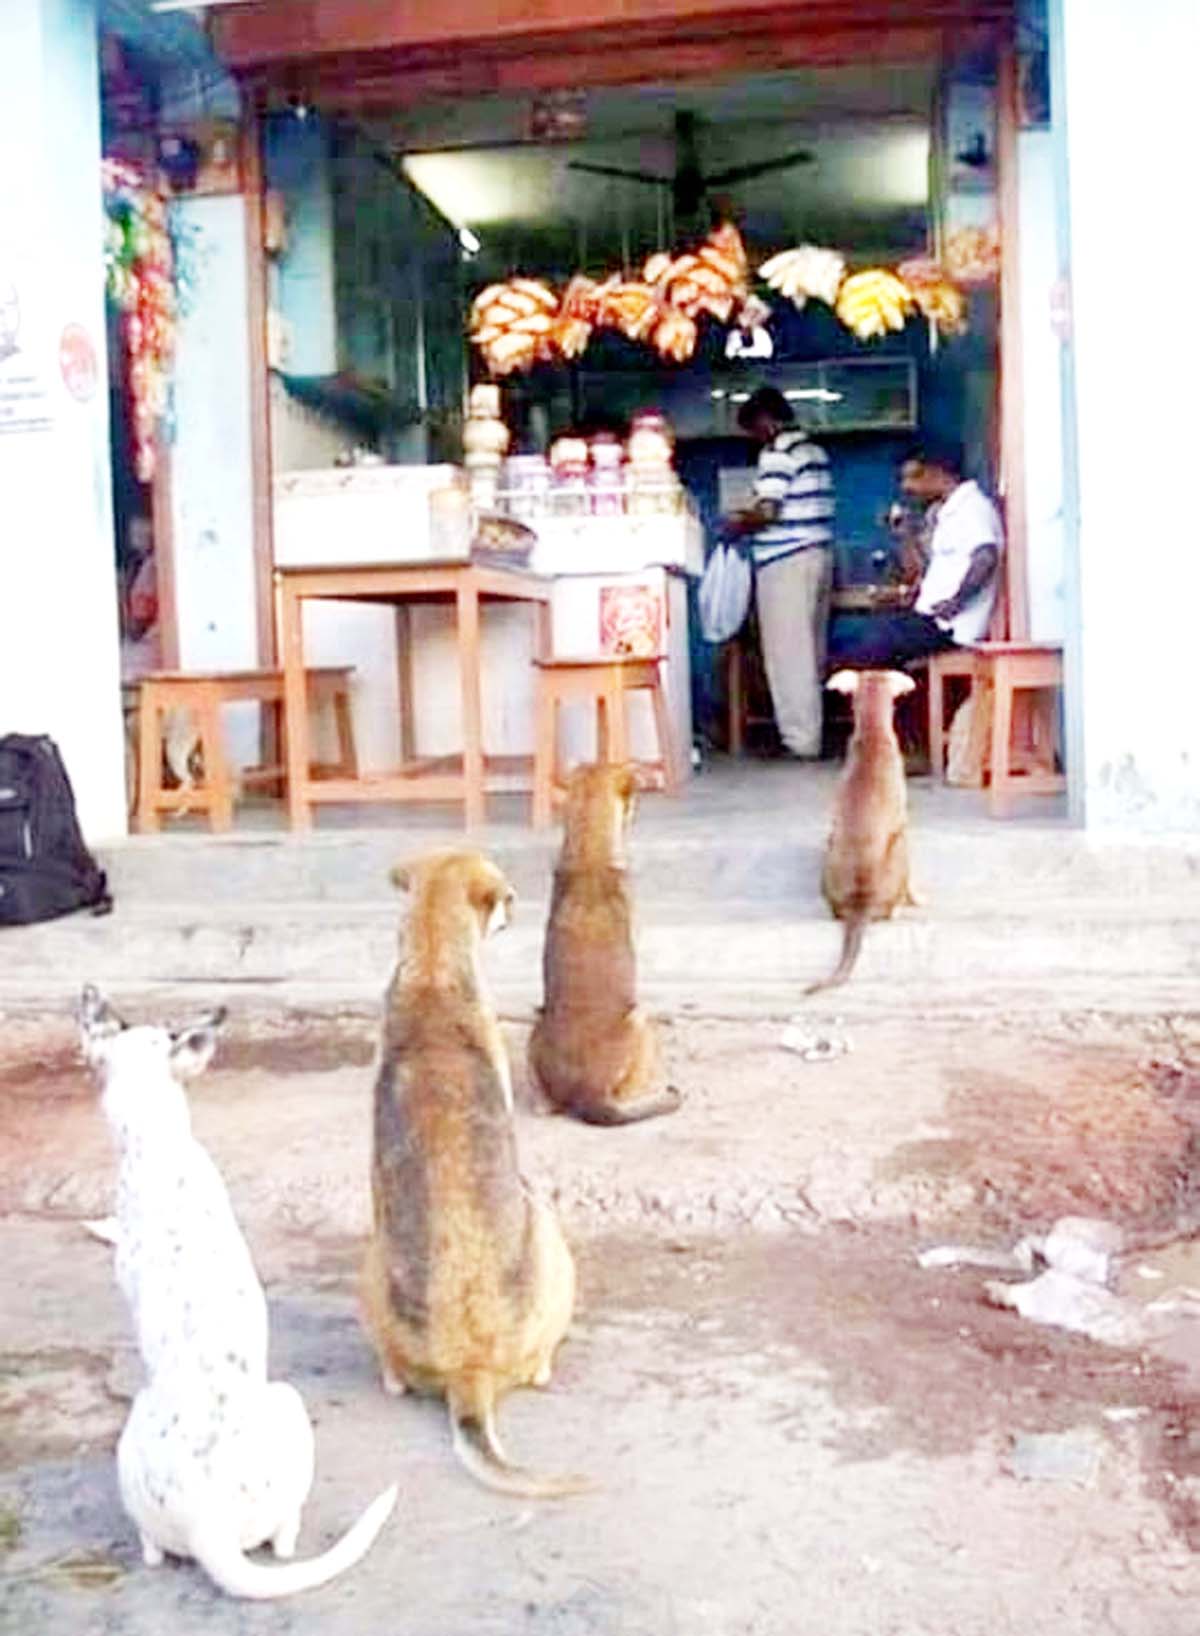 Stray dogs awaiting for food outside a shop.